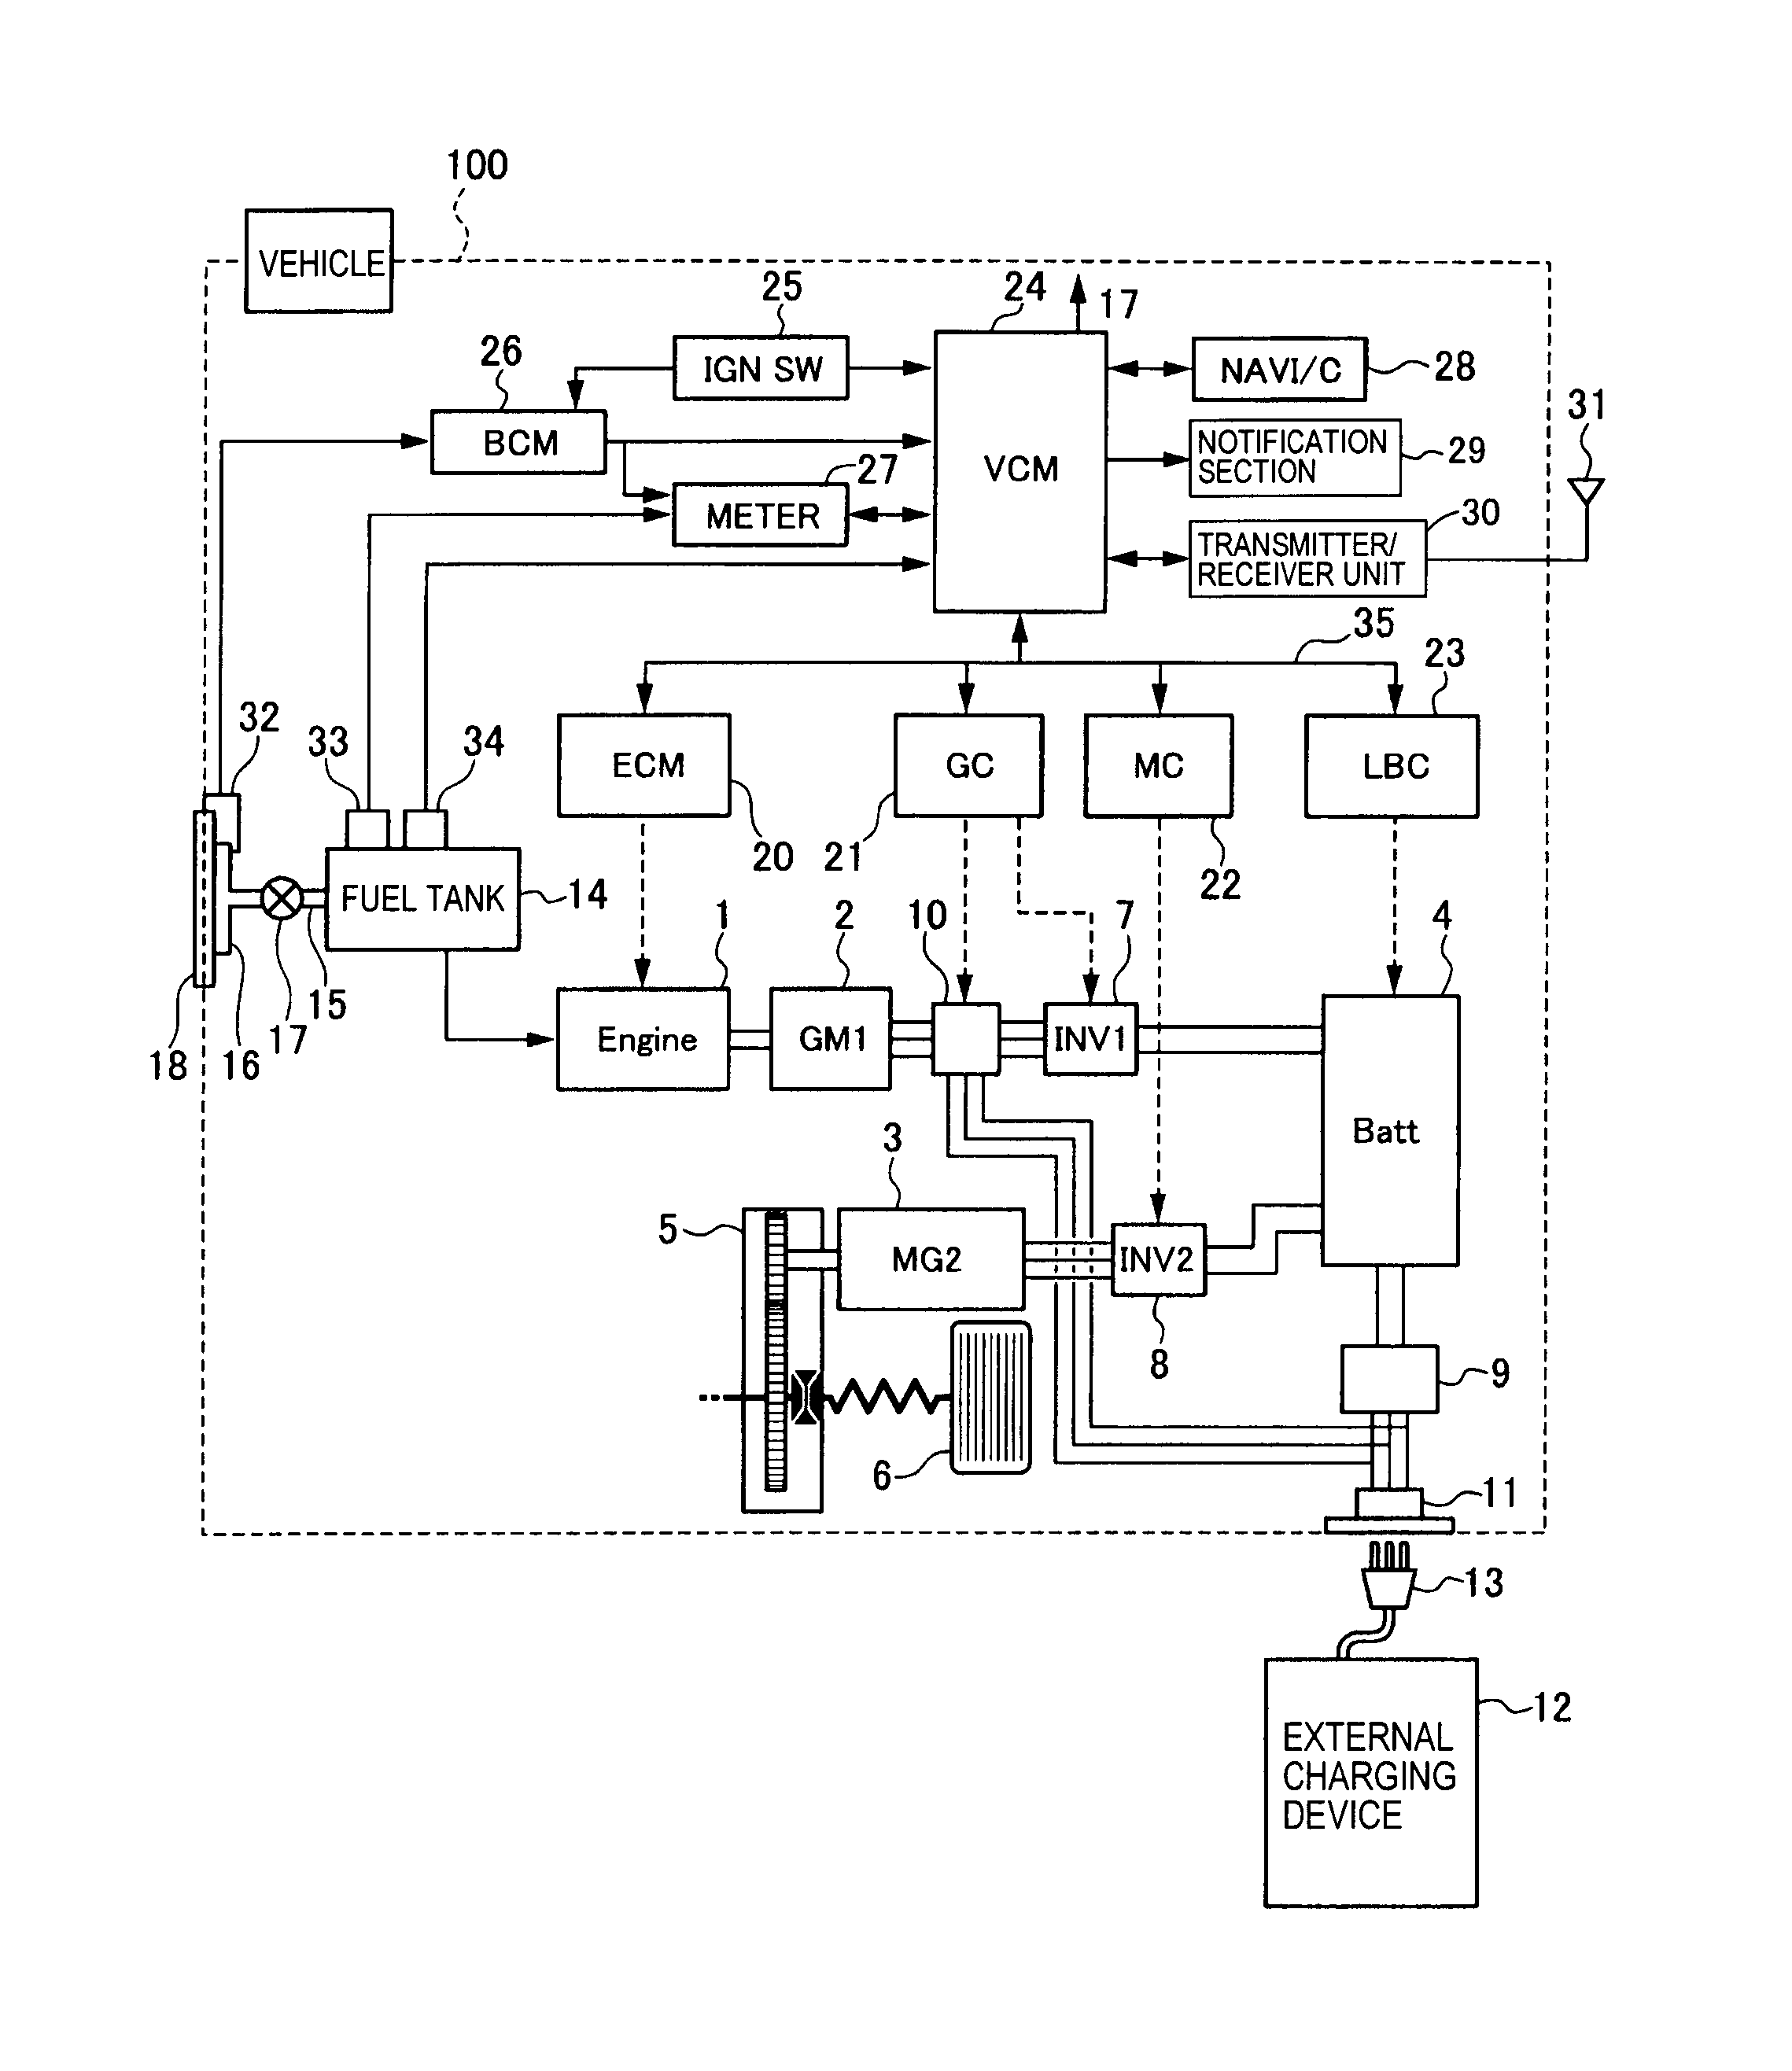 connects 2 ctssa001.2 wiring diagram